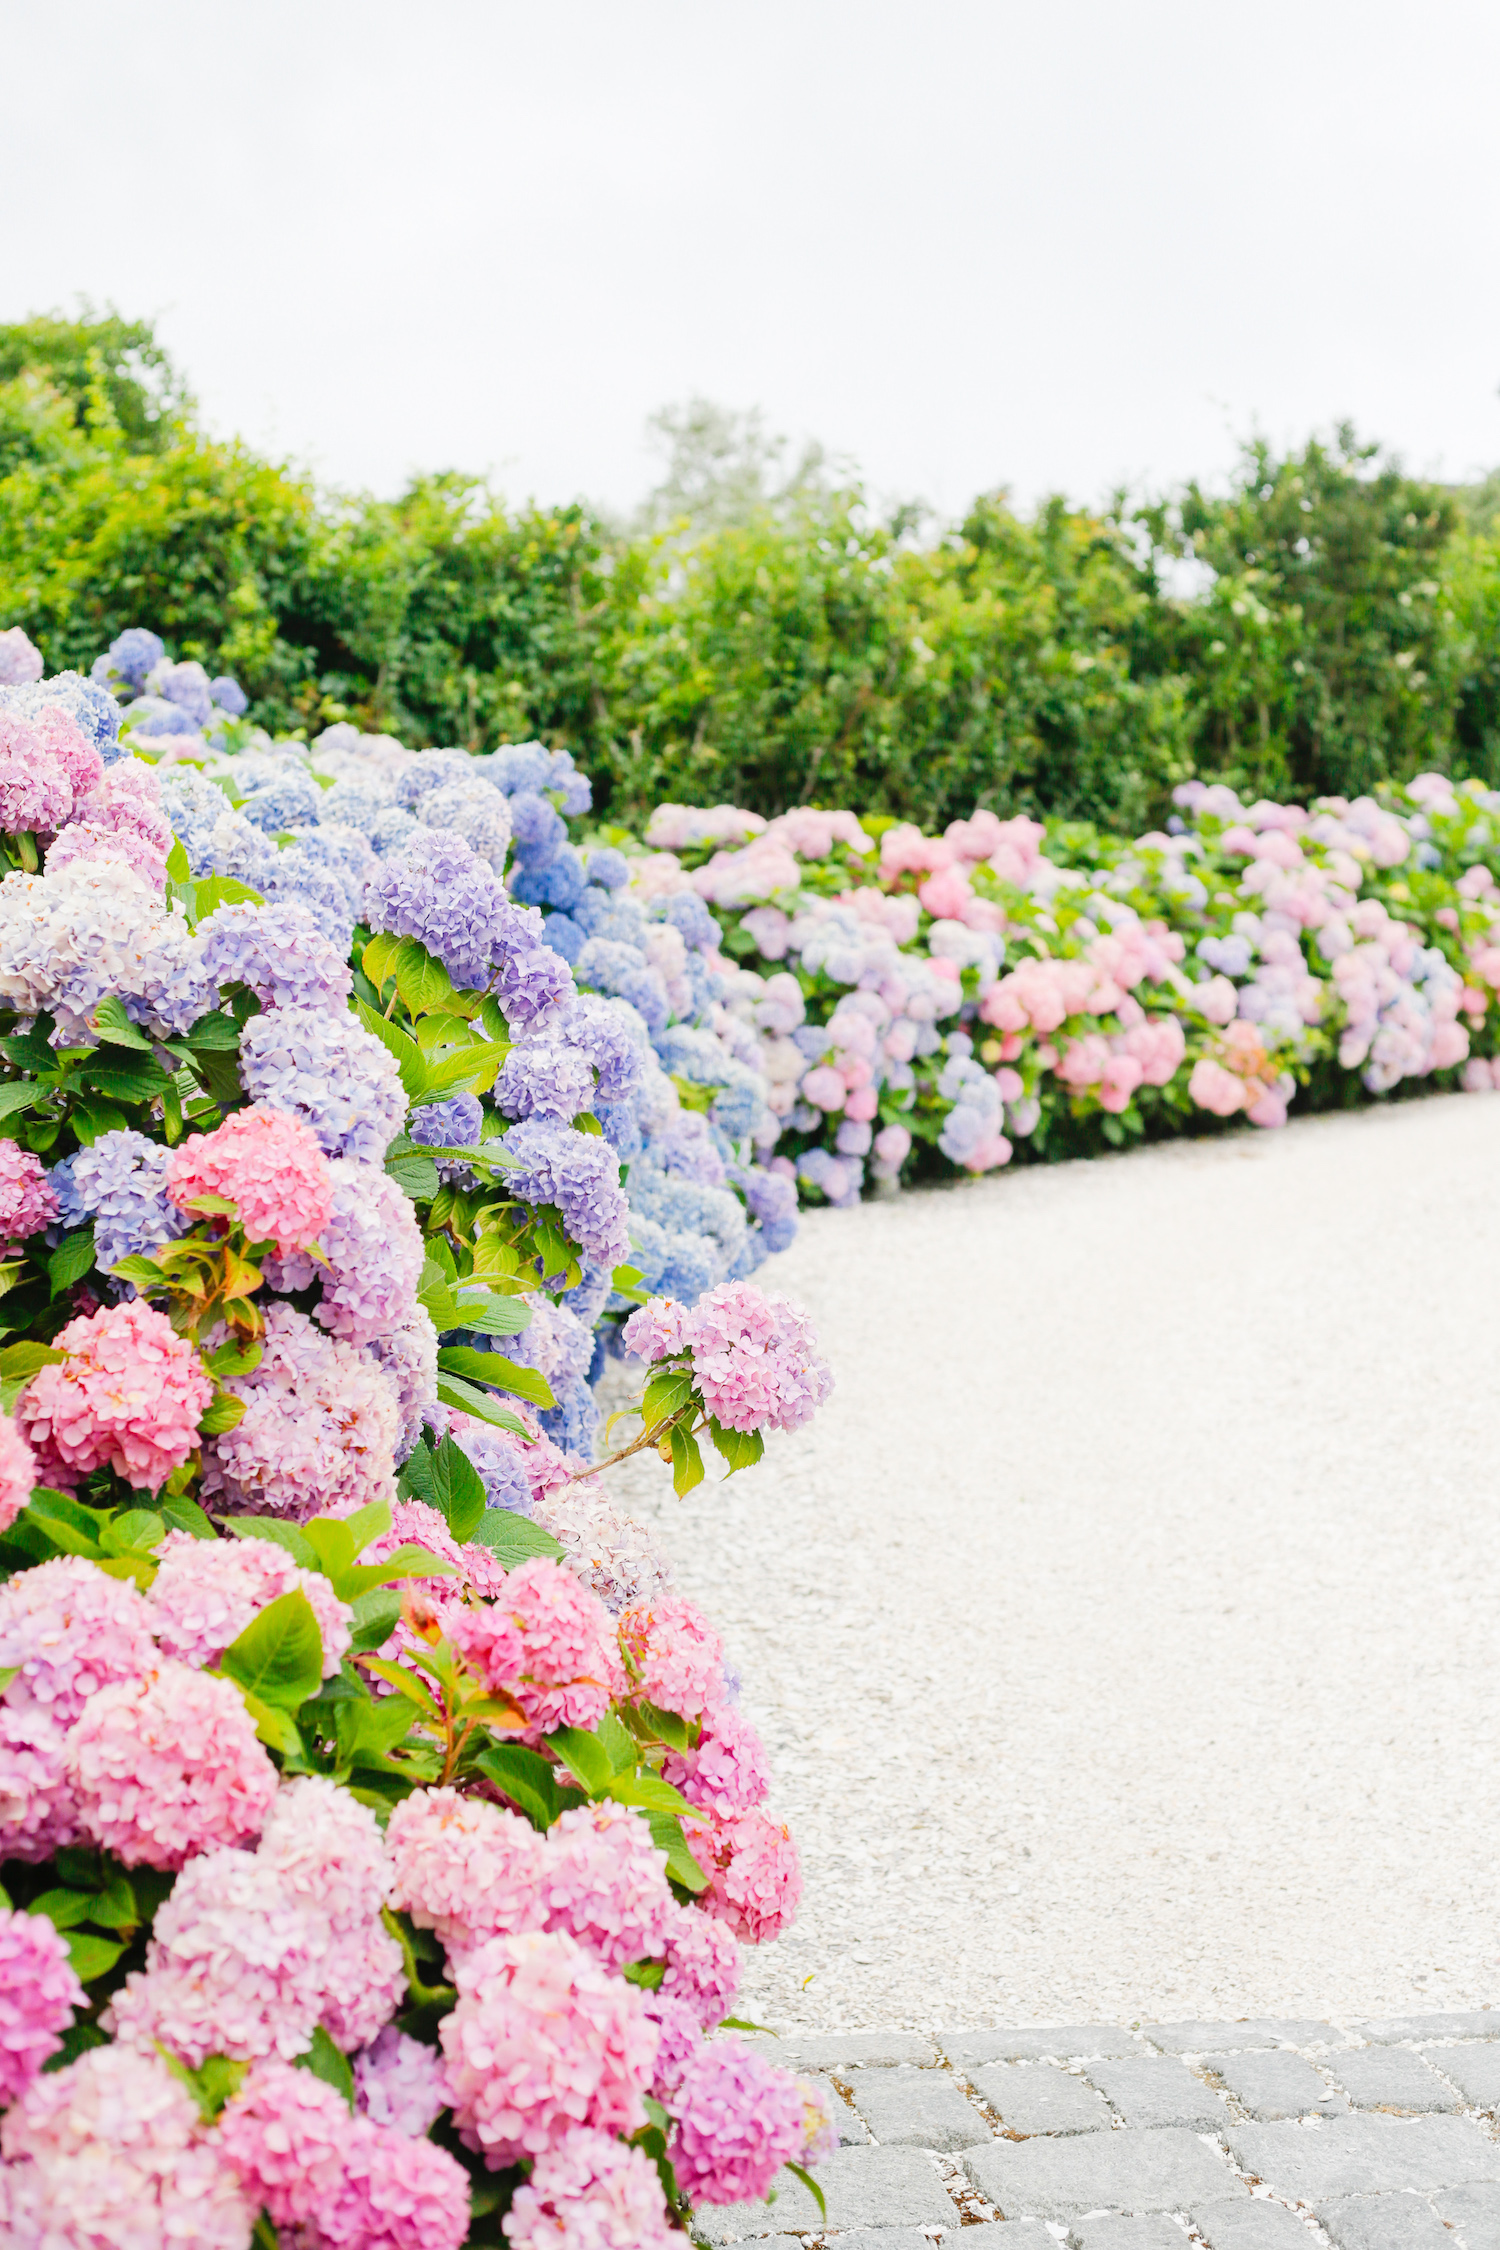 THE BEST PLACES TO SEE HYDRANGEAS ON NANTUCKET